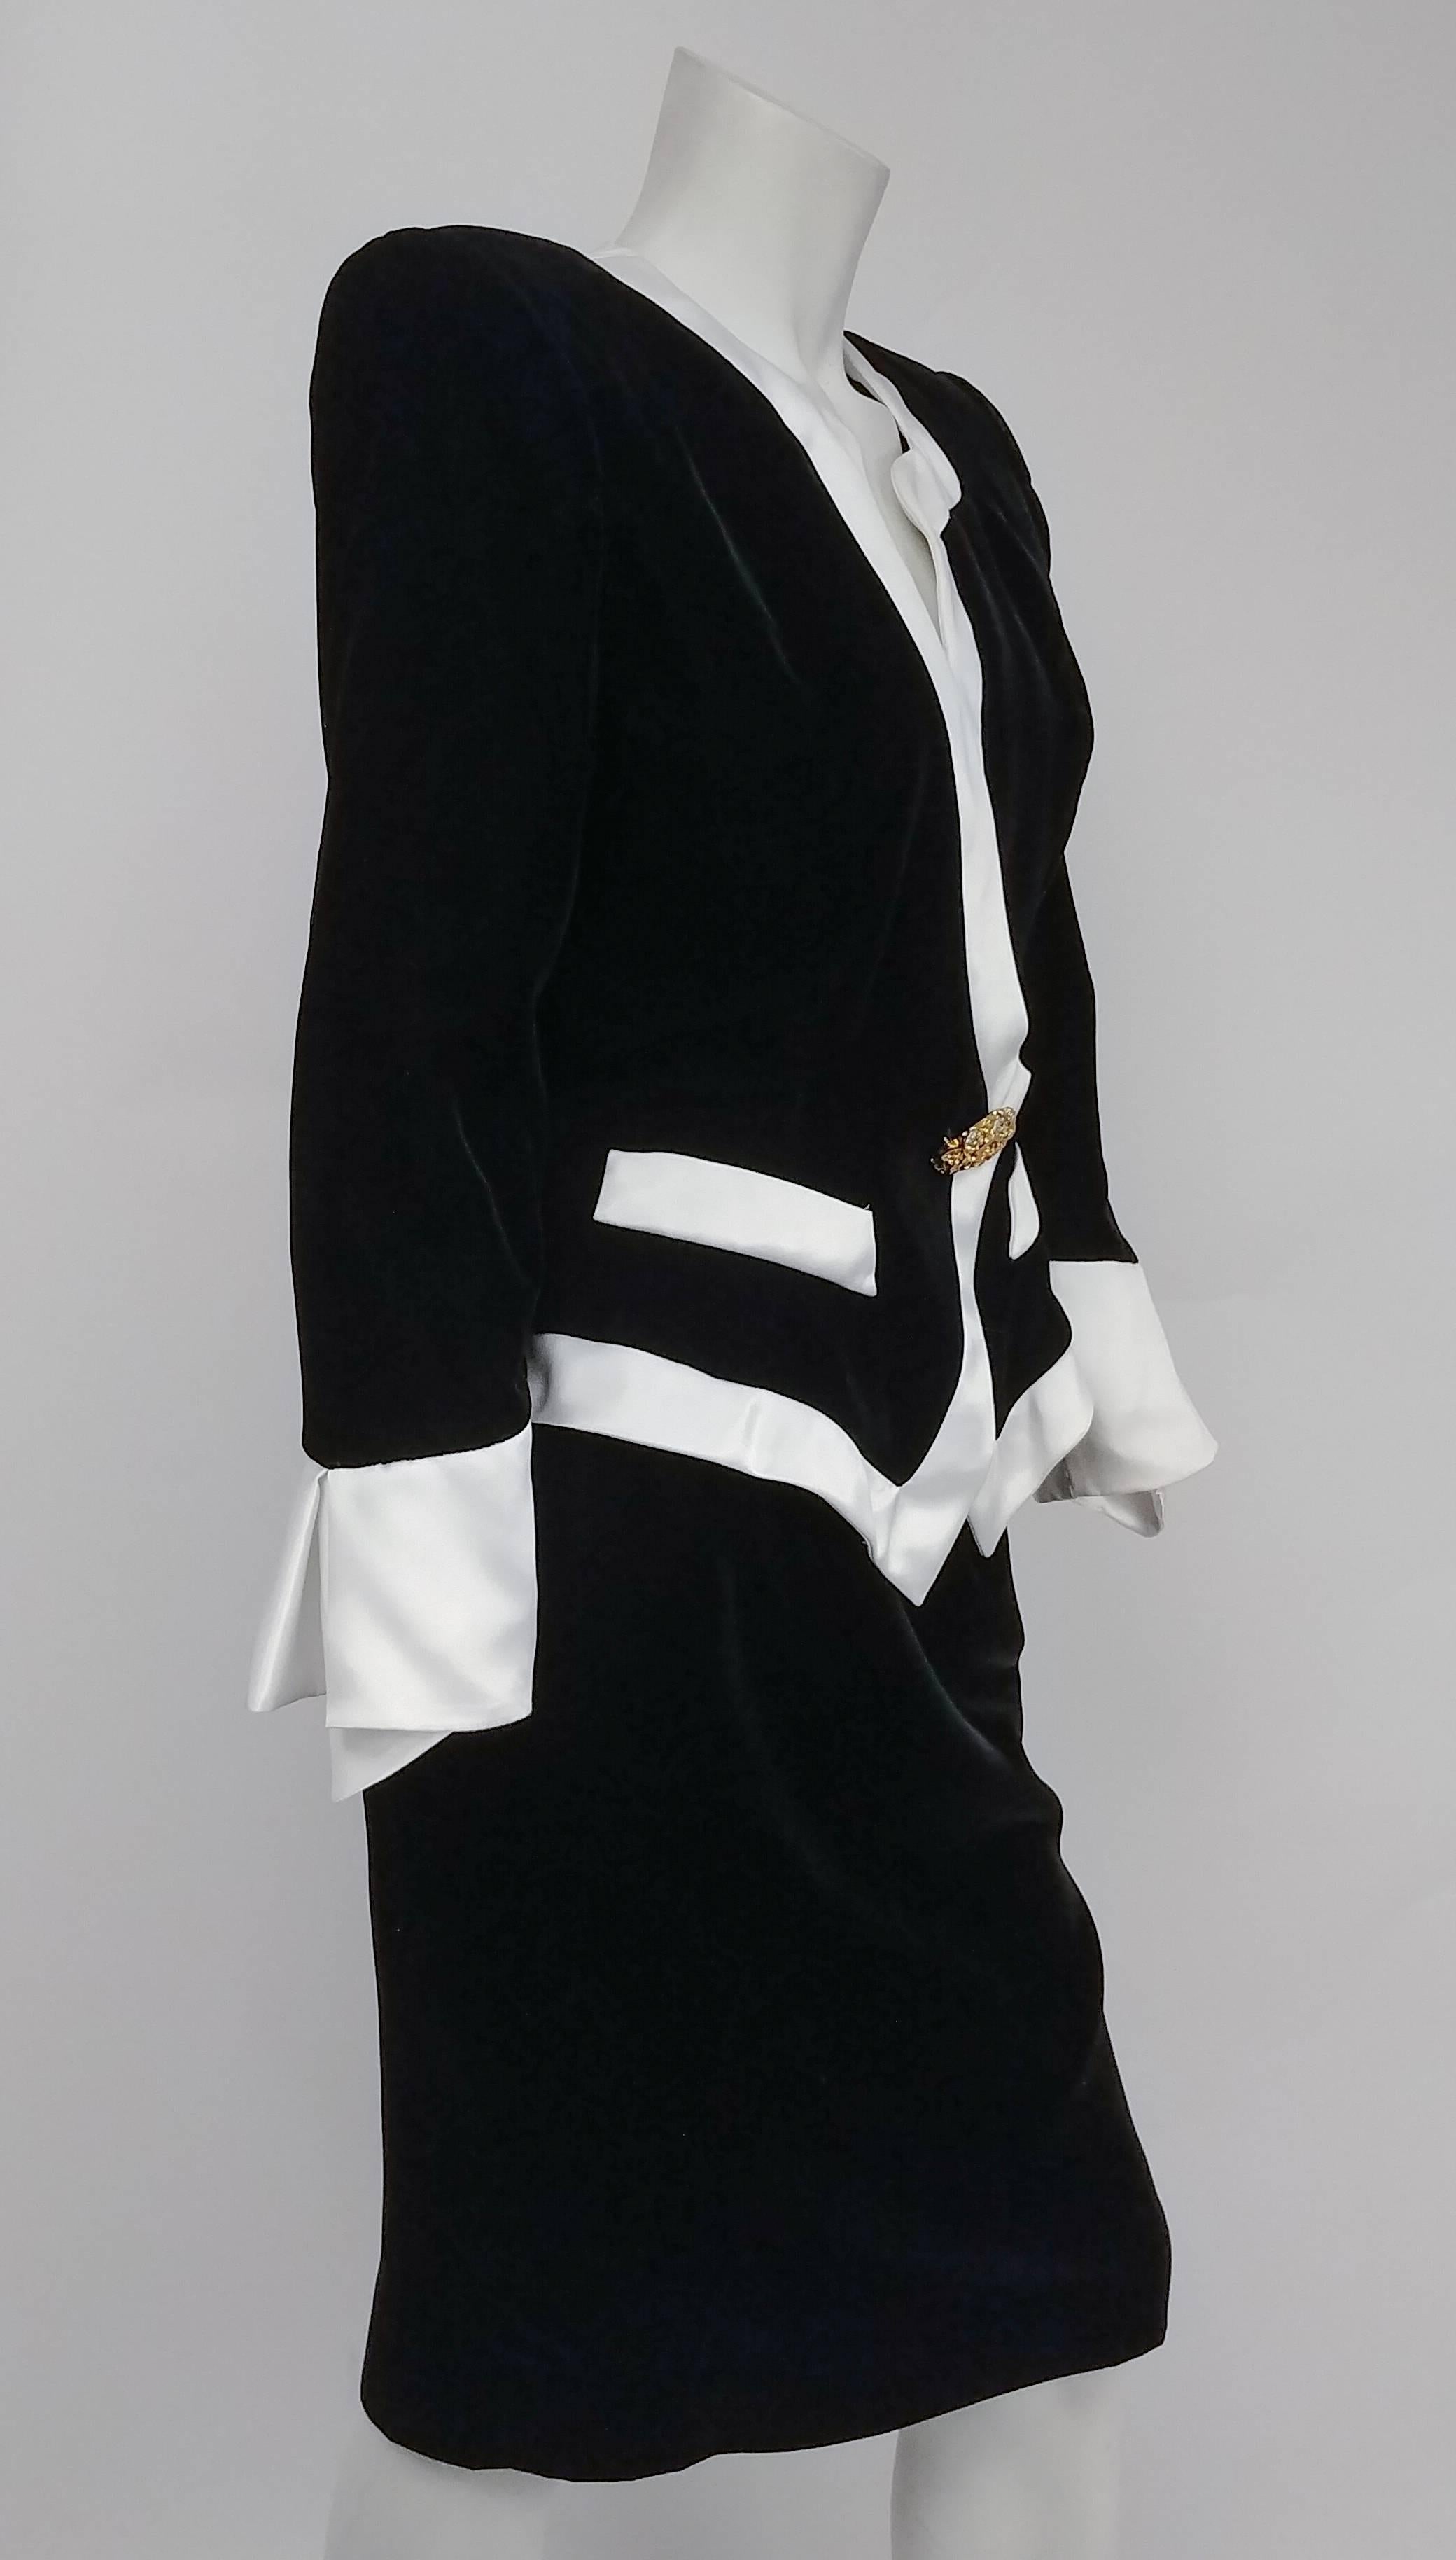 1980s Lilli Rubin Black Velvet Jacket & Skirt Suit Set w/ White Satin Trim. Asymmetrical jacket collar detail, this jacket snaps close at front, with decorative rhinestone brooch.  Dramatic side contrast cuffs on the sleeve. Skirt zips up side. 